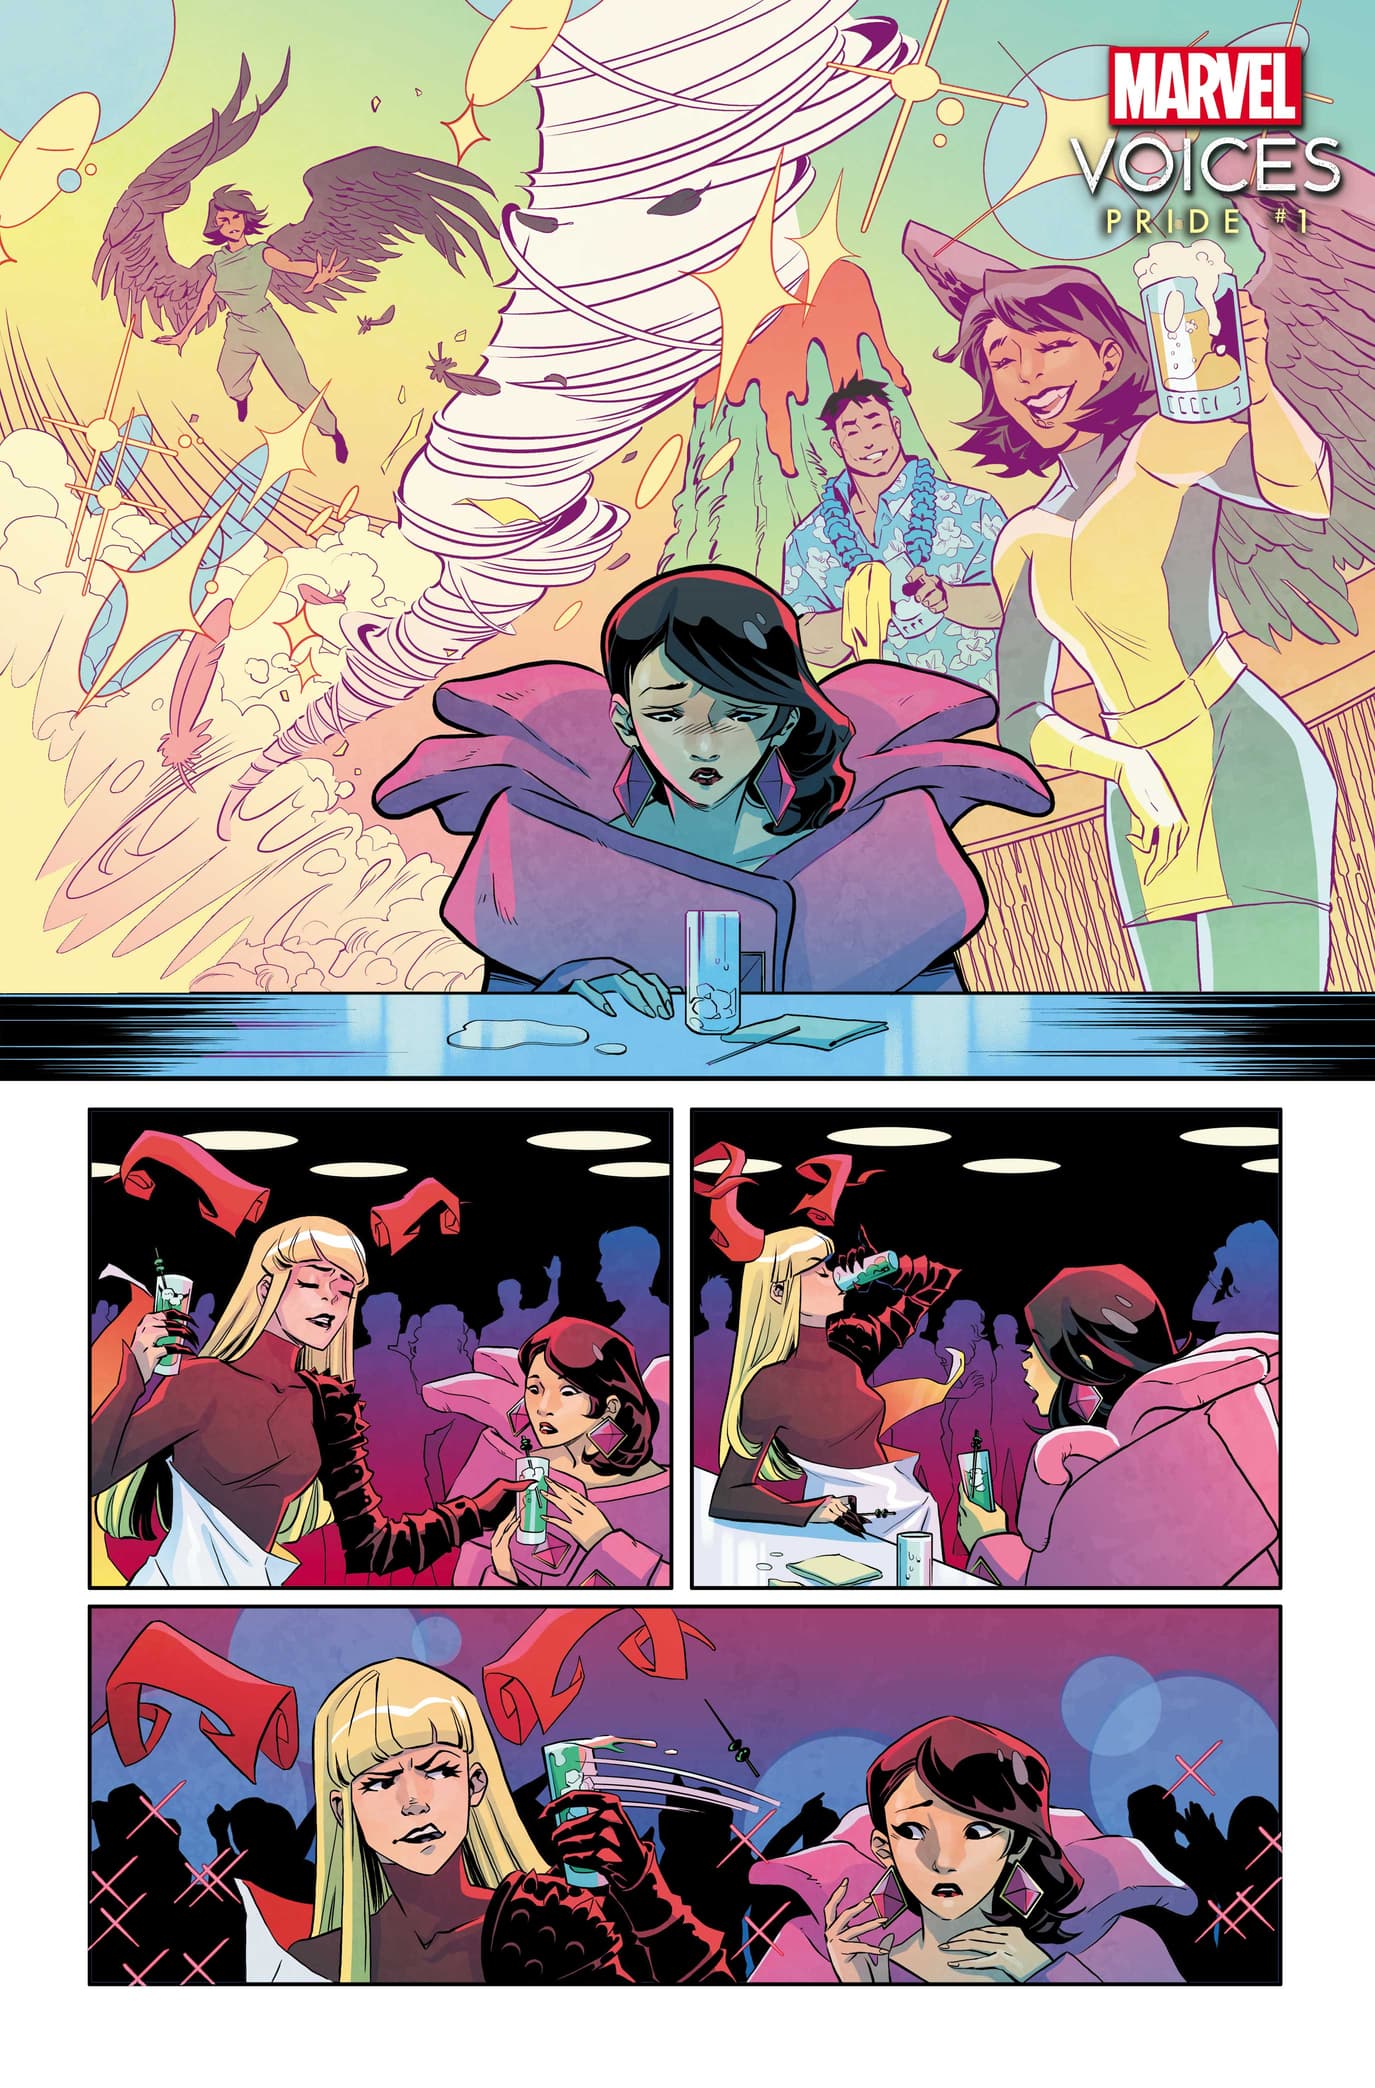 MARVEL'S VOICES: PRIDE #1 preview art by Joanna Estep, layouts by Brittney Williams, colors by Brittany Peer